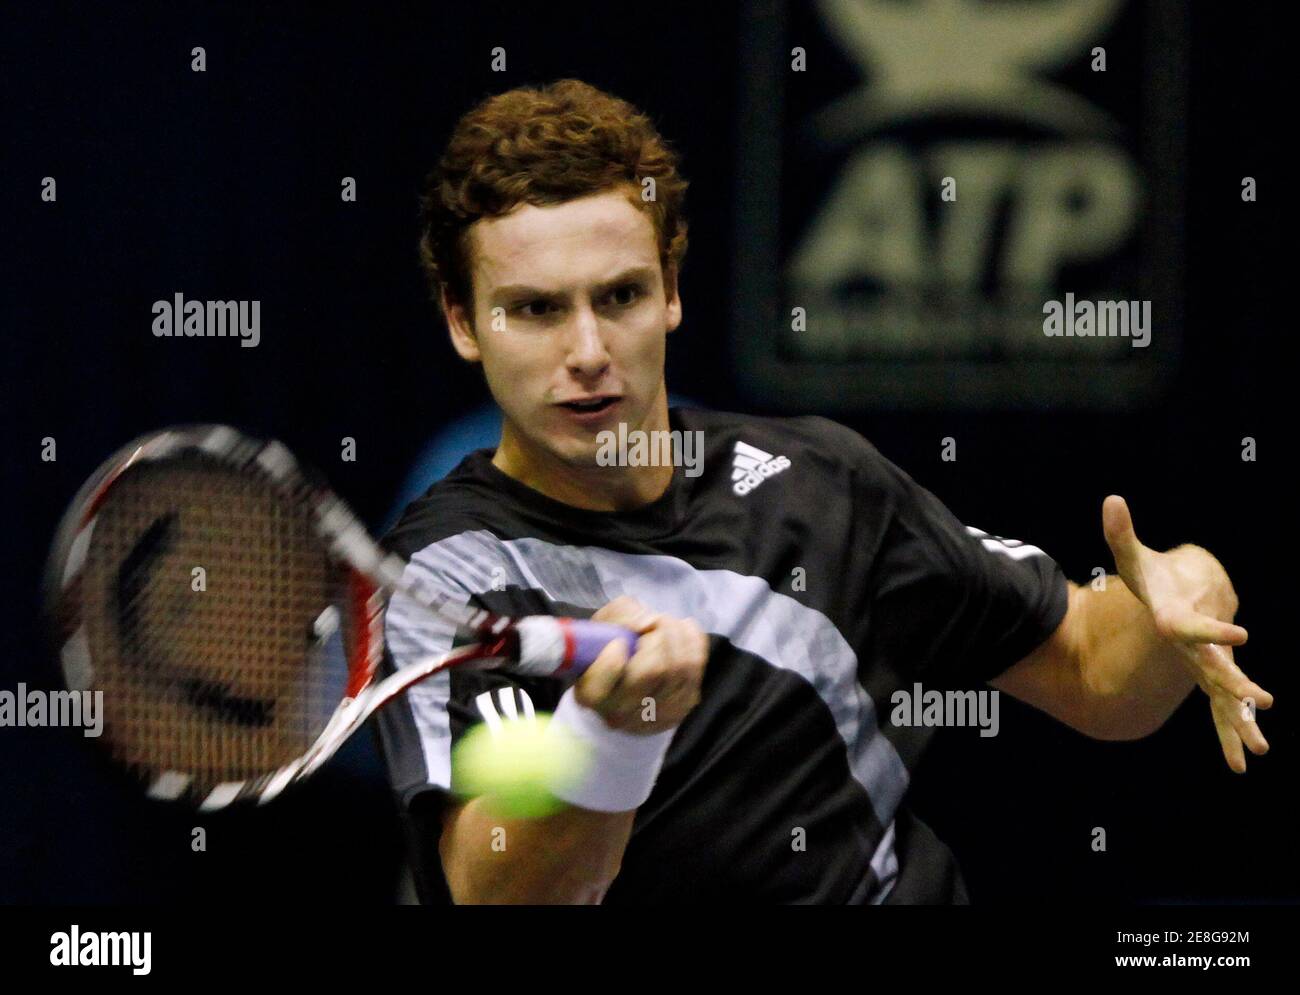 Ernests Gulbis of Latvia returns a shot to Somdev Devvarman of India during their first round match at the Thailand Open tennis tournament in Bangkok September 29, 2009. REUTERS/Chaiwat Subprasom (THAILAND SPORT TENNIS) Stock Photo